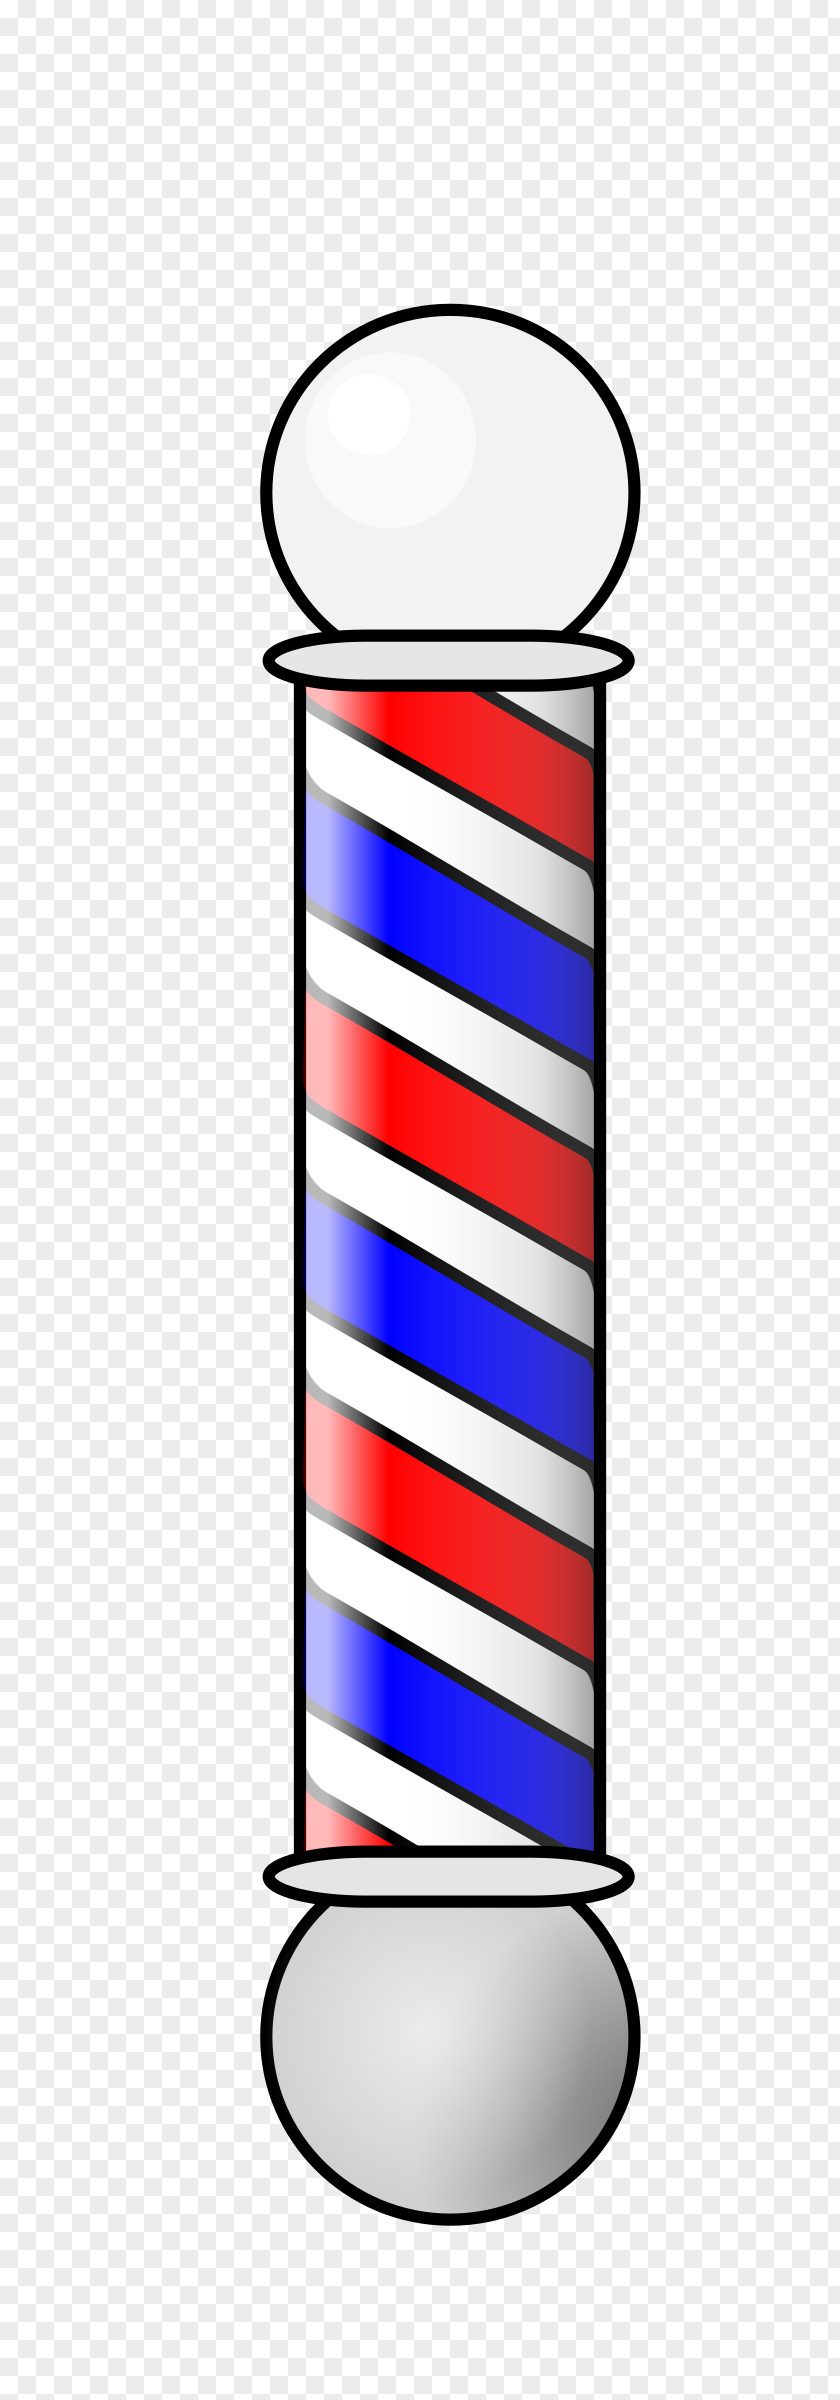 Barber's Pole Hair Clipper Hairstyle Clip Art PNG